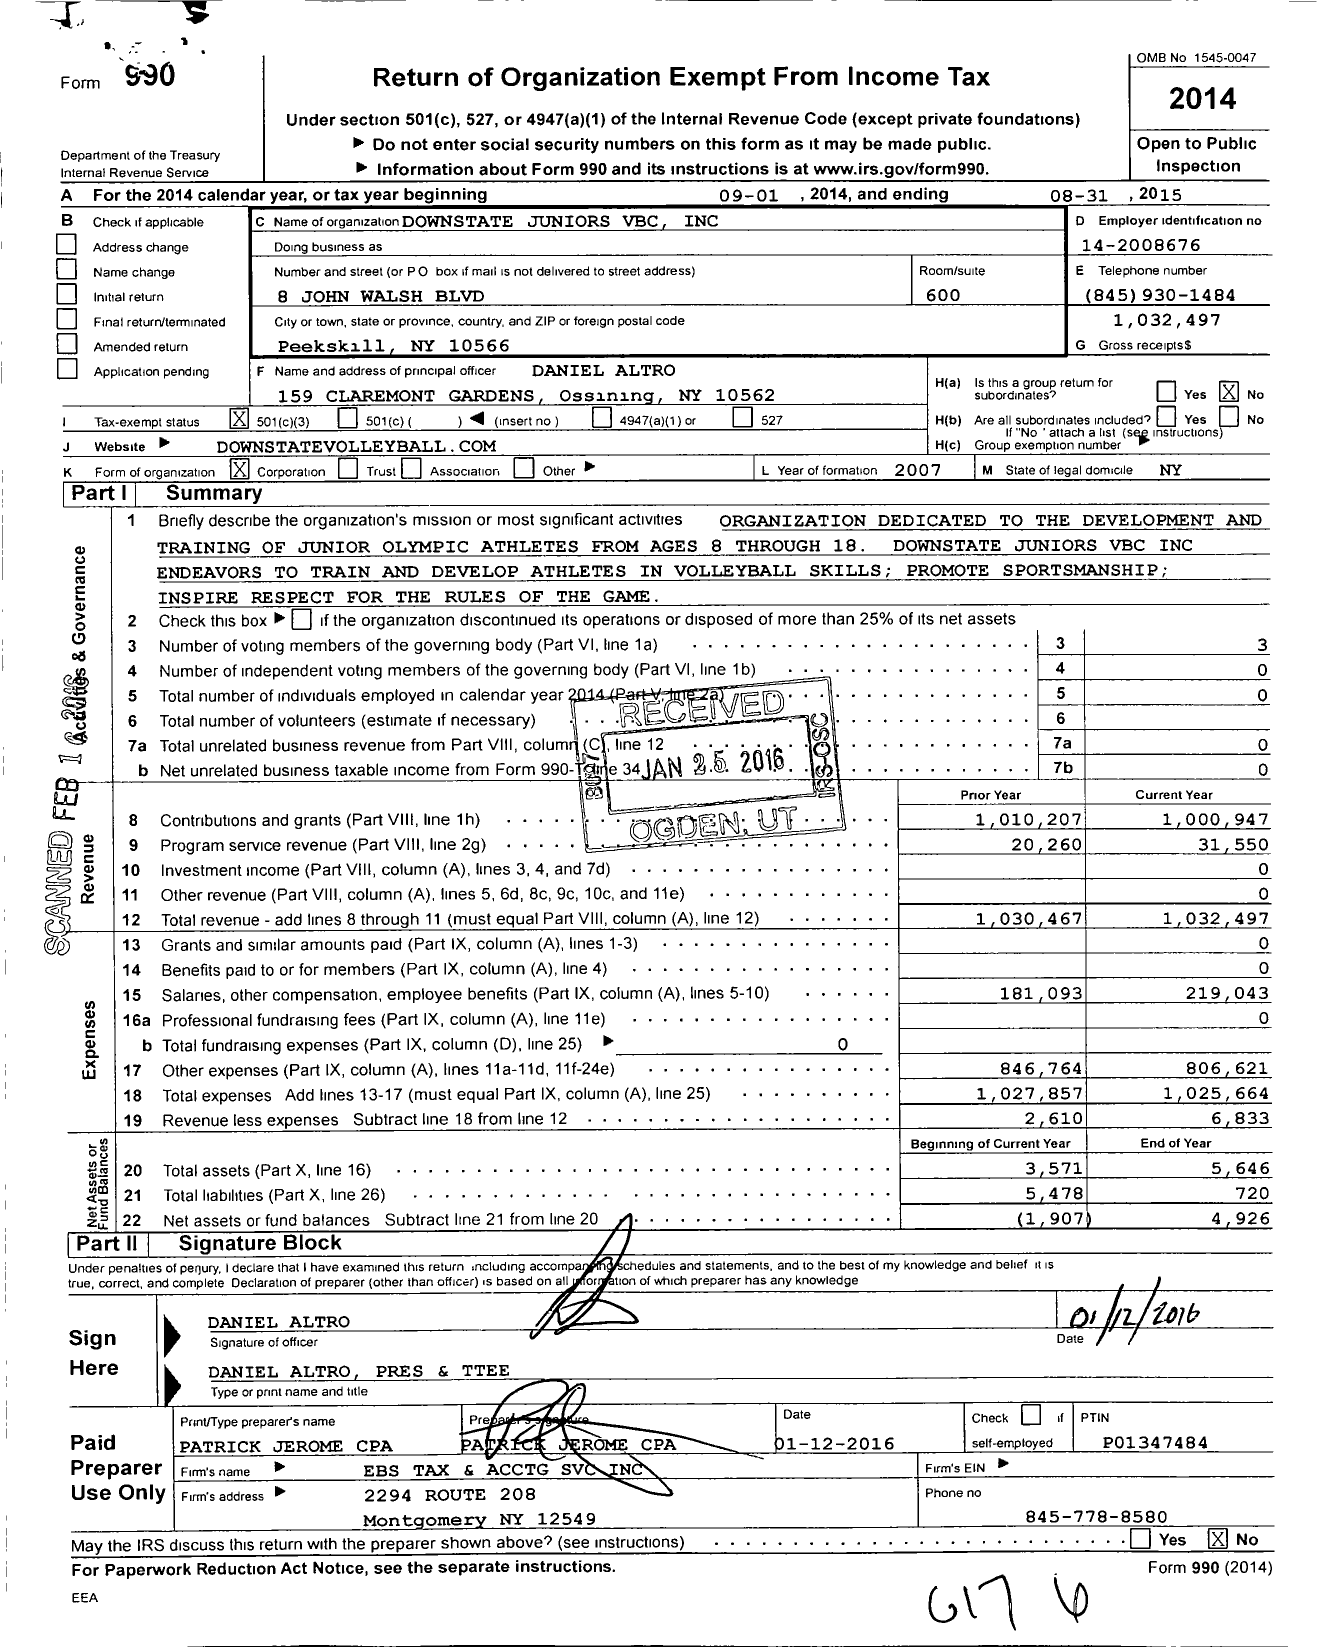 Image of first page of 2014 Form 990 for Downstate Juniors VBC